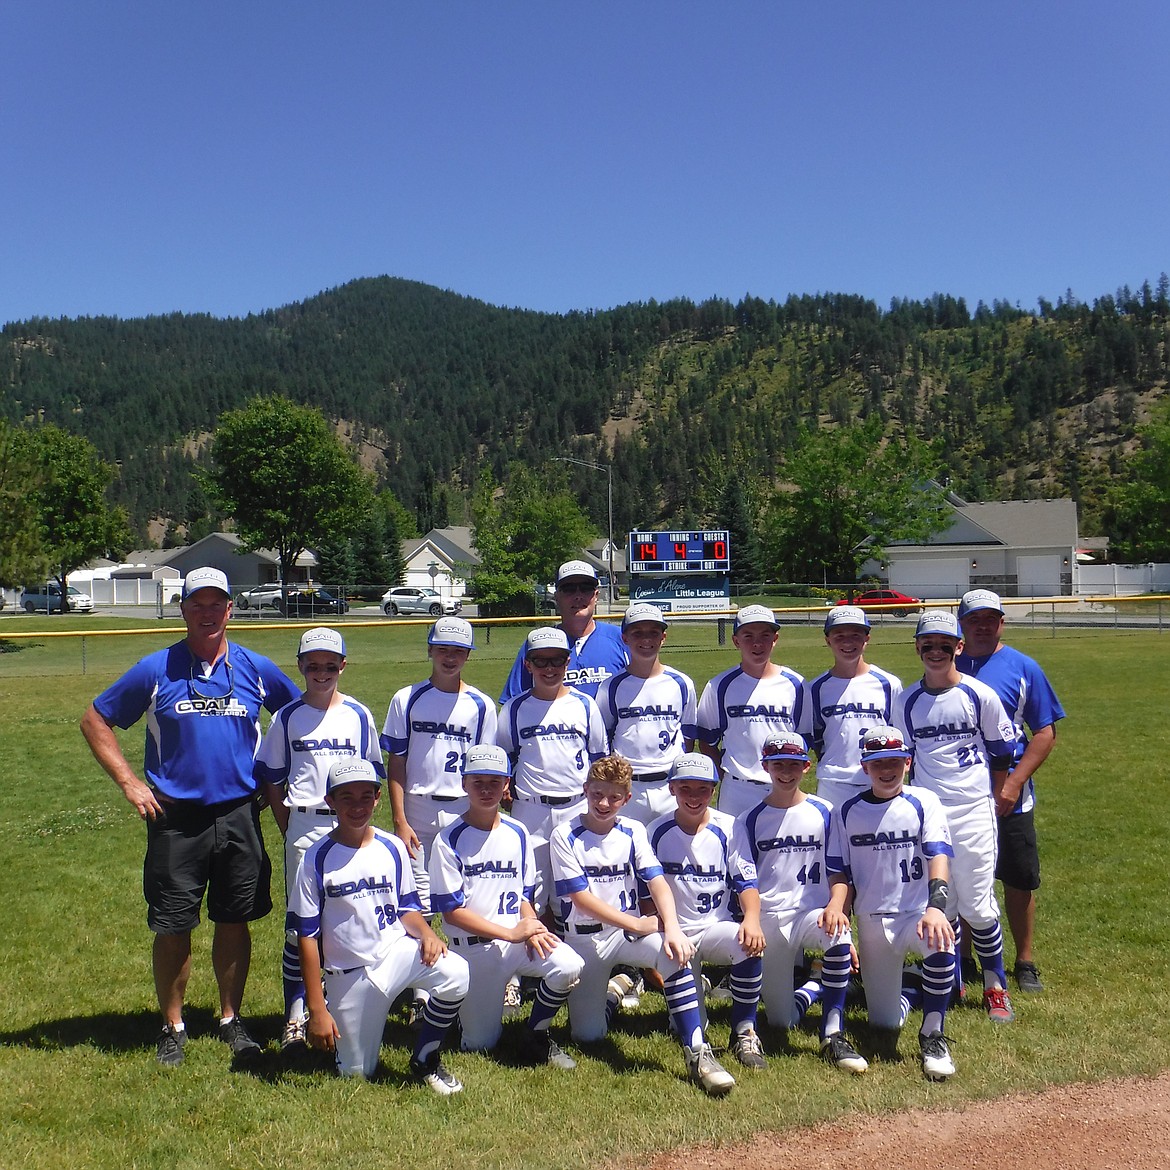 Courtesy photo
Coeur d&#146;Alene will face Hayden this weekend in a best-of-3 series for the Idaho District 1 Little League Majors (12U) baseball championship at Croffoot Park in Hayden. Game times are Friday at 5:30 p.m., Saturday at noon and Sunday, if necessary, at noon. The winner advances to the state playoffs in Eagle July 20-22. Members of the Coeur d&#146;Alene team are, front row from left, Kyle Seman, Jake Dannenberg, Chase Saunders, Caden Symons, Kyle Schwarzer and Chris Reynolds; and back row from left, coach Sean Cherry, Avrey Cherry, AJ Currie, Cooper Smith, coach Steve Saunders, Austin DeBoer, Braeden Newby, Nolan Christ, Cooper Erickson and coach Manny Azevedo.